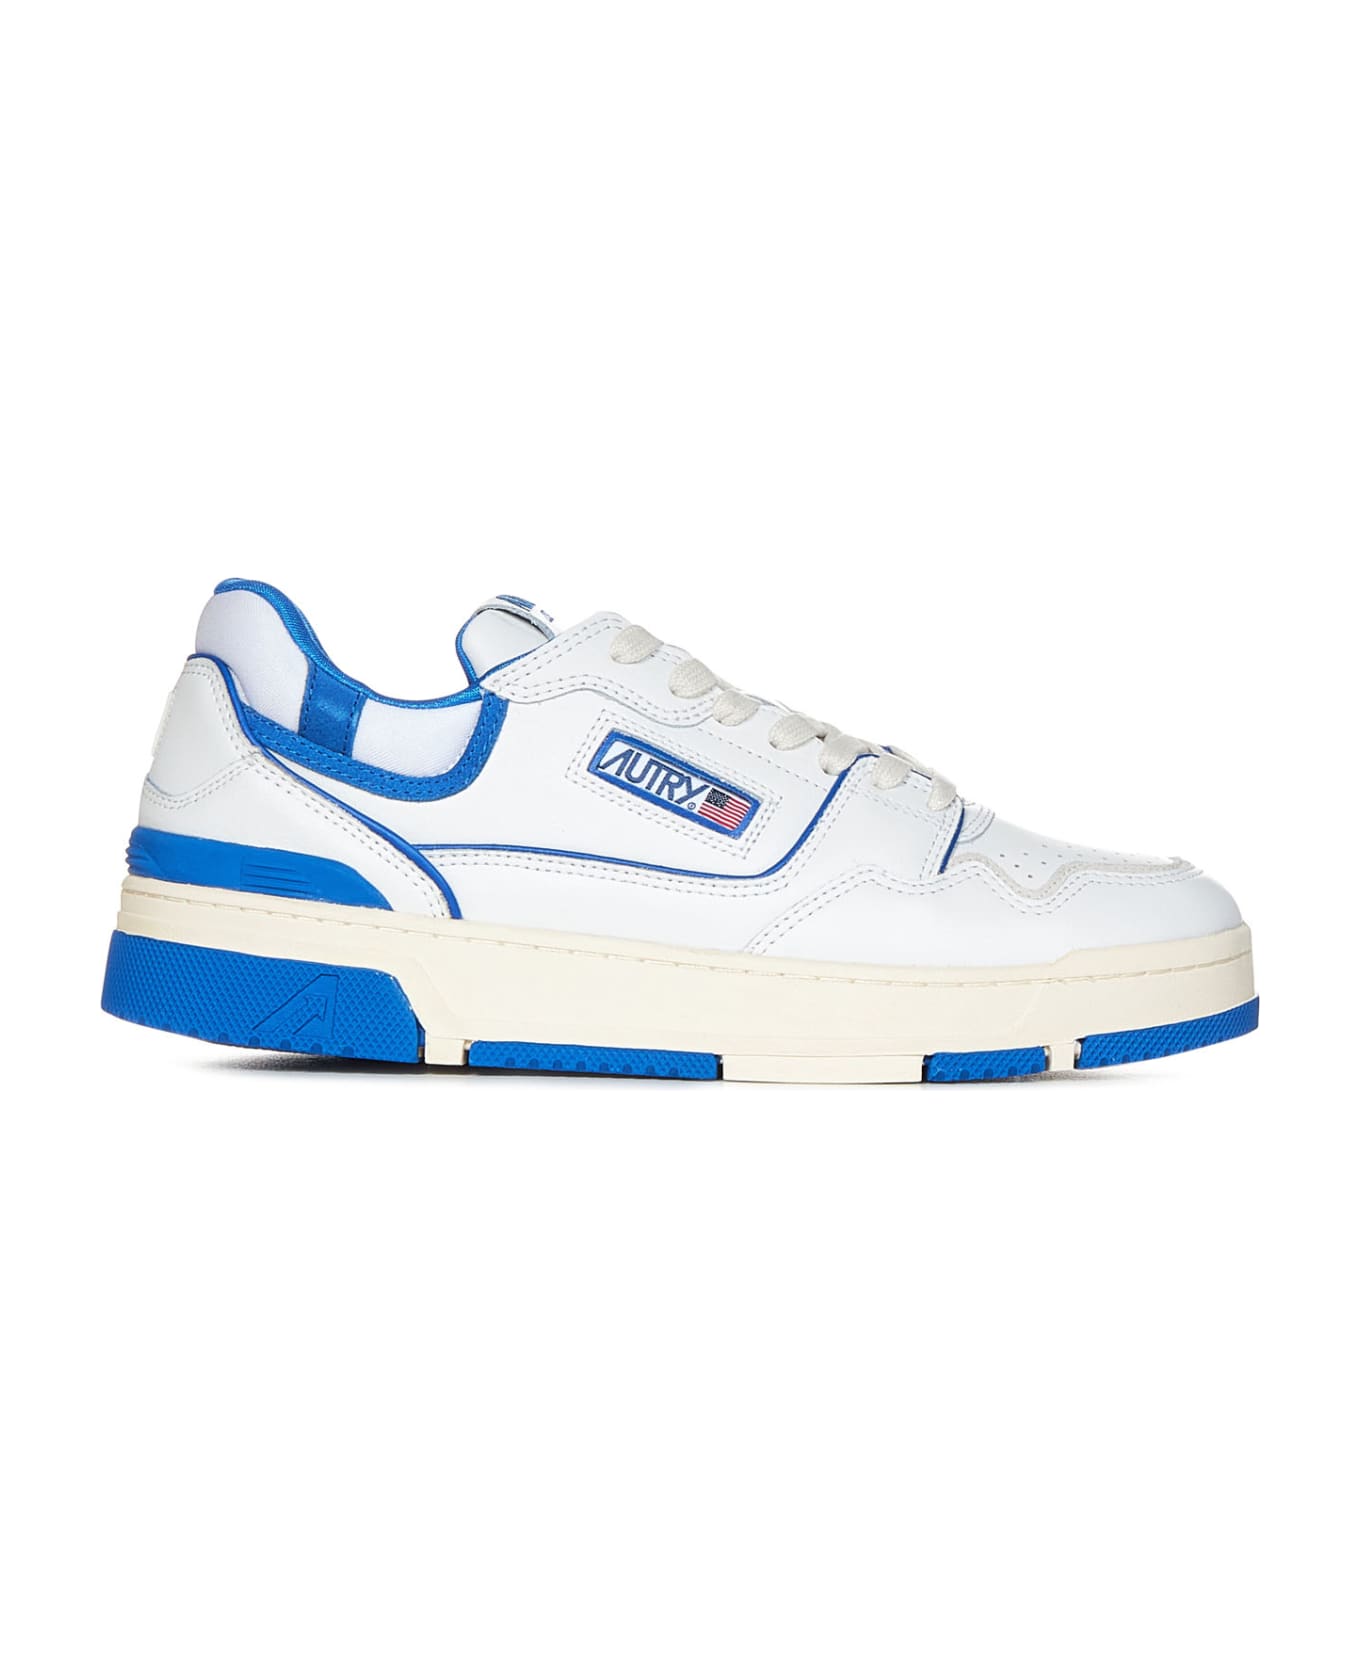 Autry Rookie Clc Low Sneakers - White